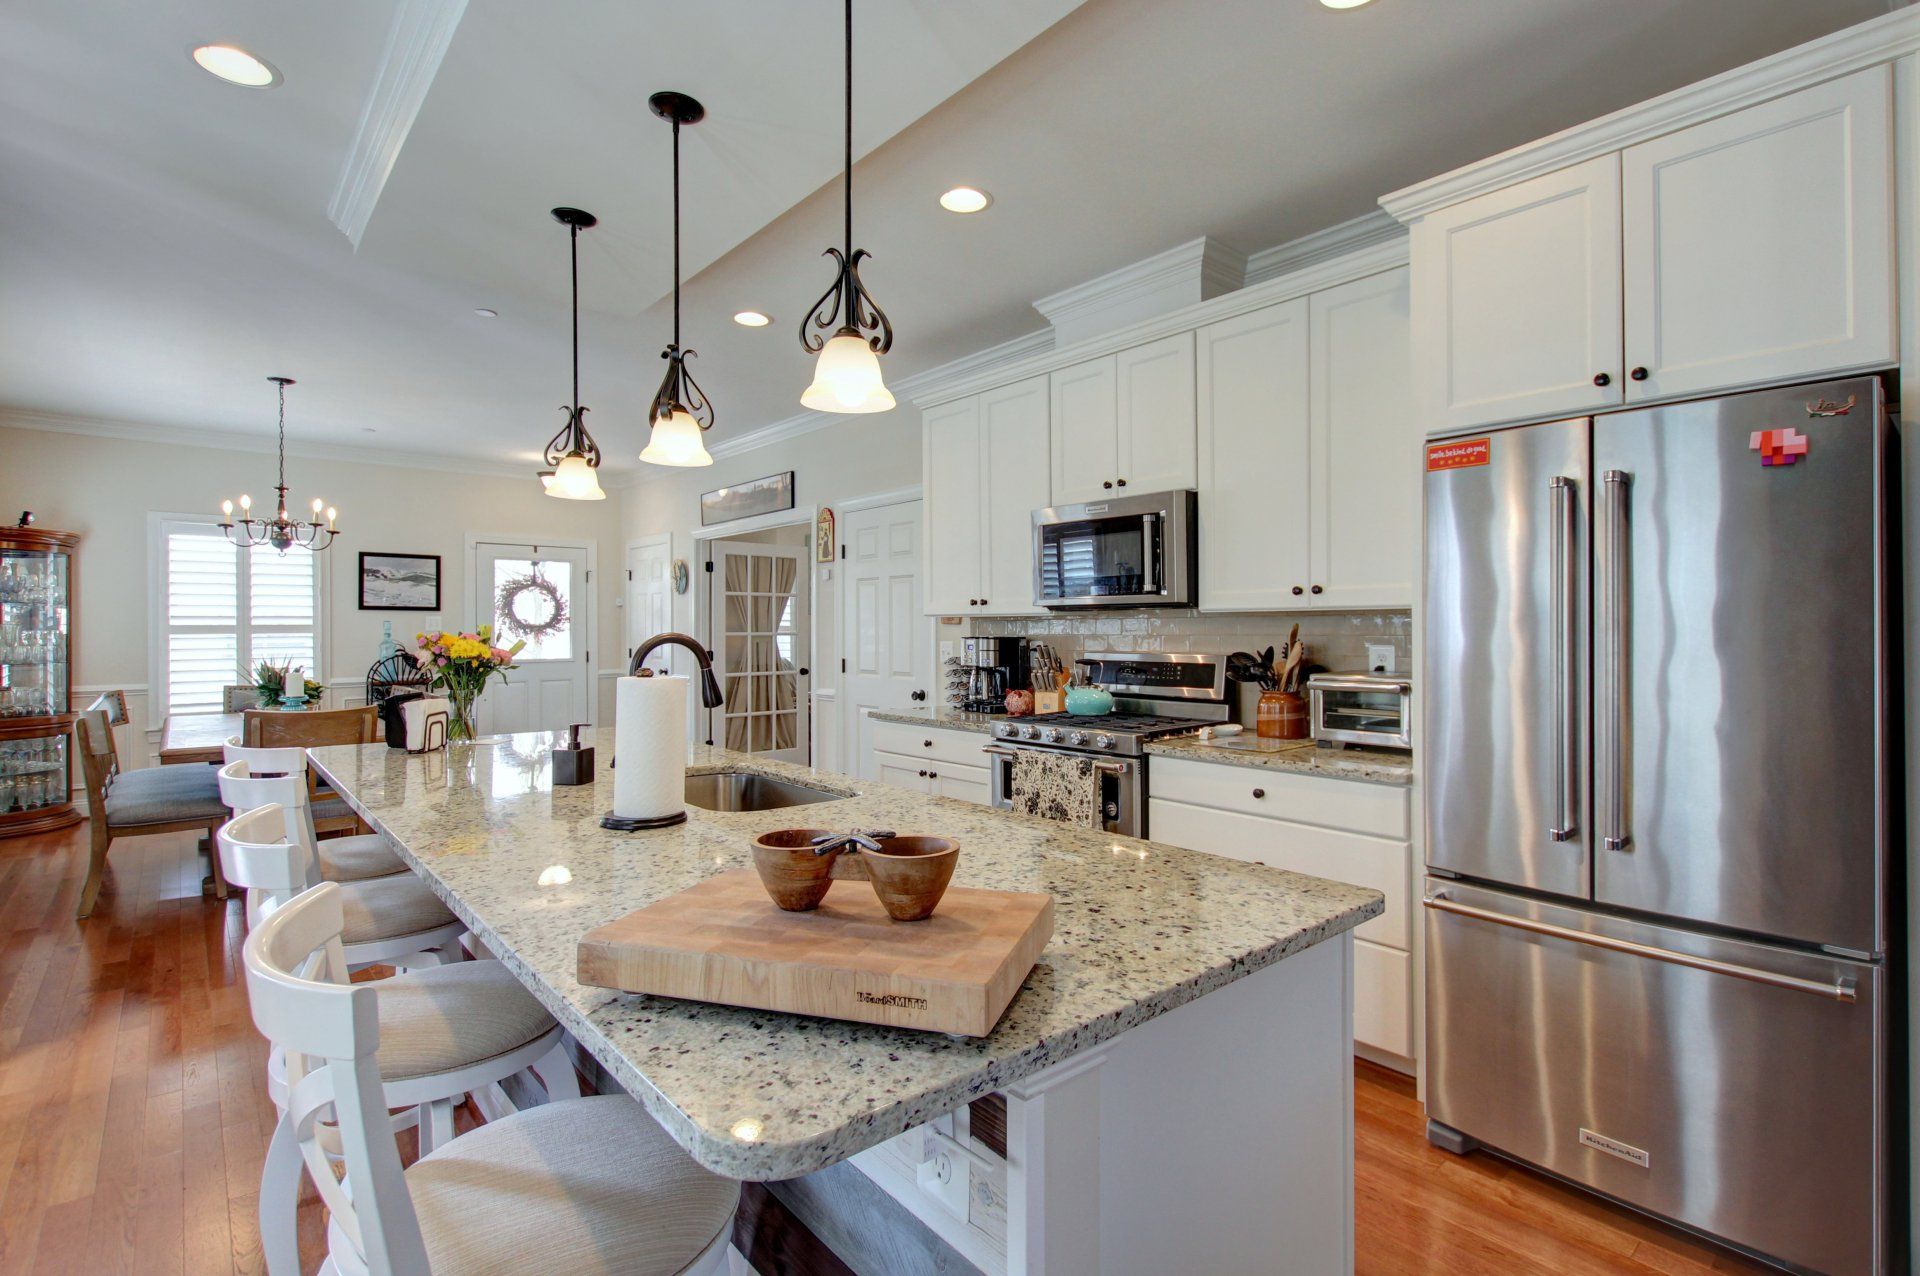 Kitchen with white cabinets and granite countertops | Oxford Legacy | Covell Communities | Chester, Maryland 21619